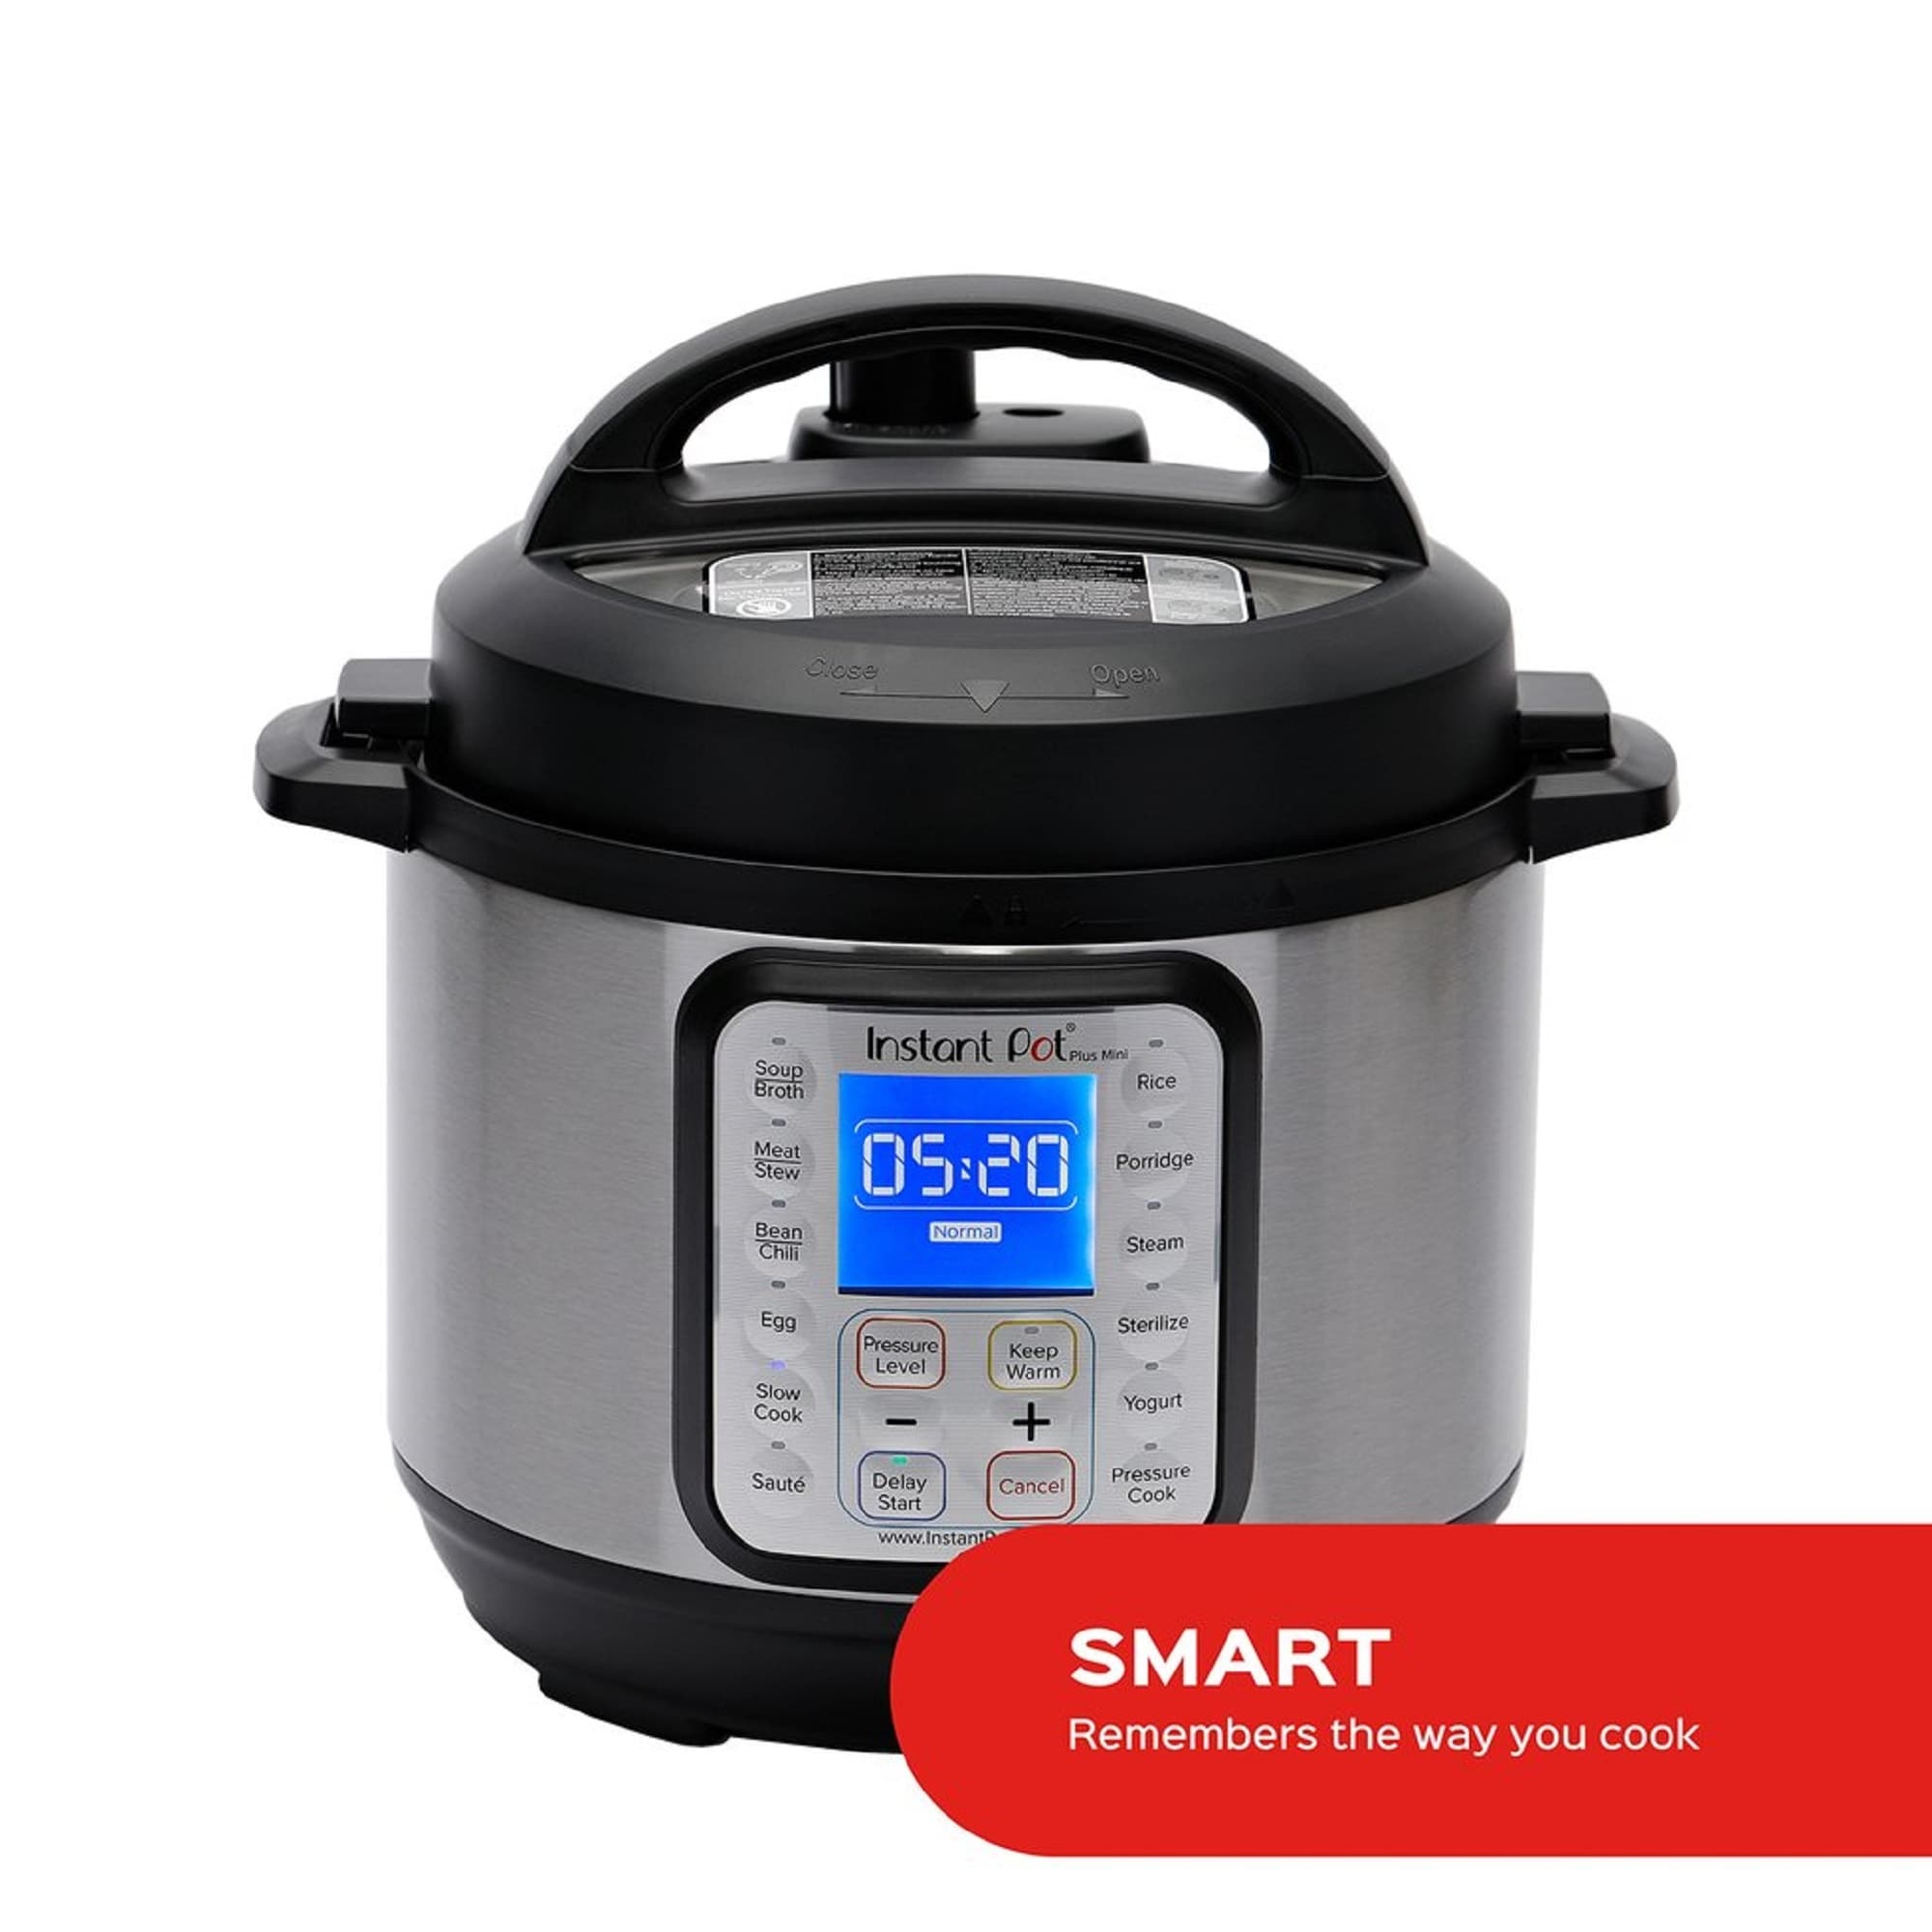 https://ak1.ostkcdn.com/images/products/is/images/direct/90451bcfa79dfbe7e426dca580150a8c990d466a/Instant-Pot-DUO-Plus-3-Qt-9-in-1-Programmable-Pressure-Cooker.jpg